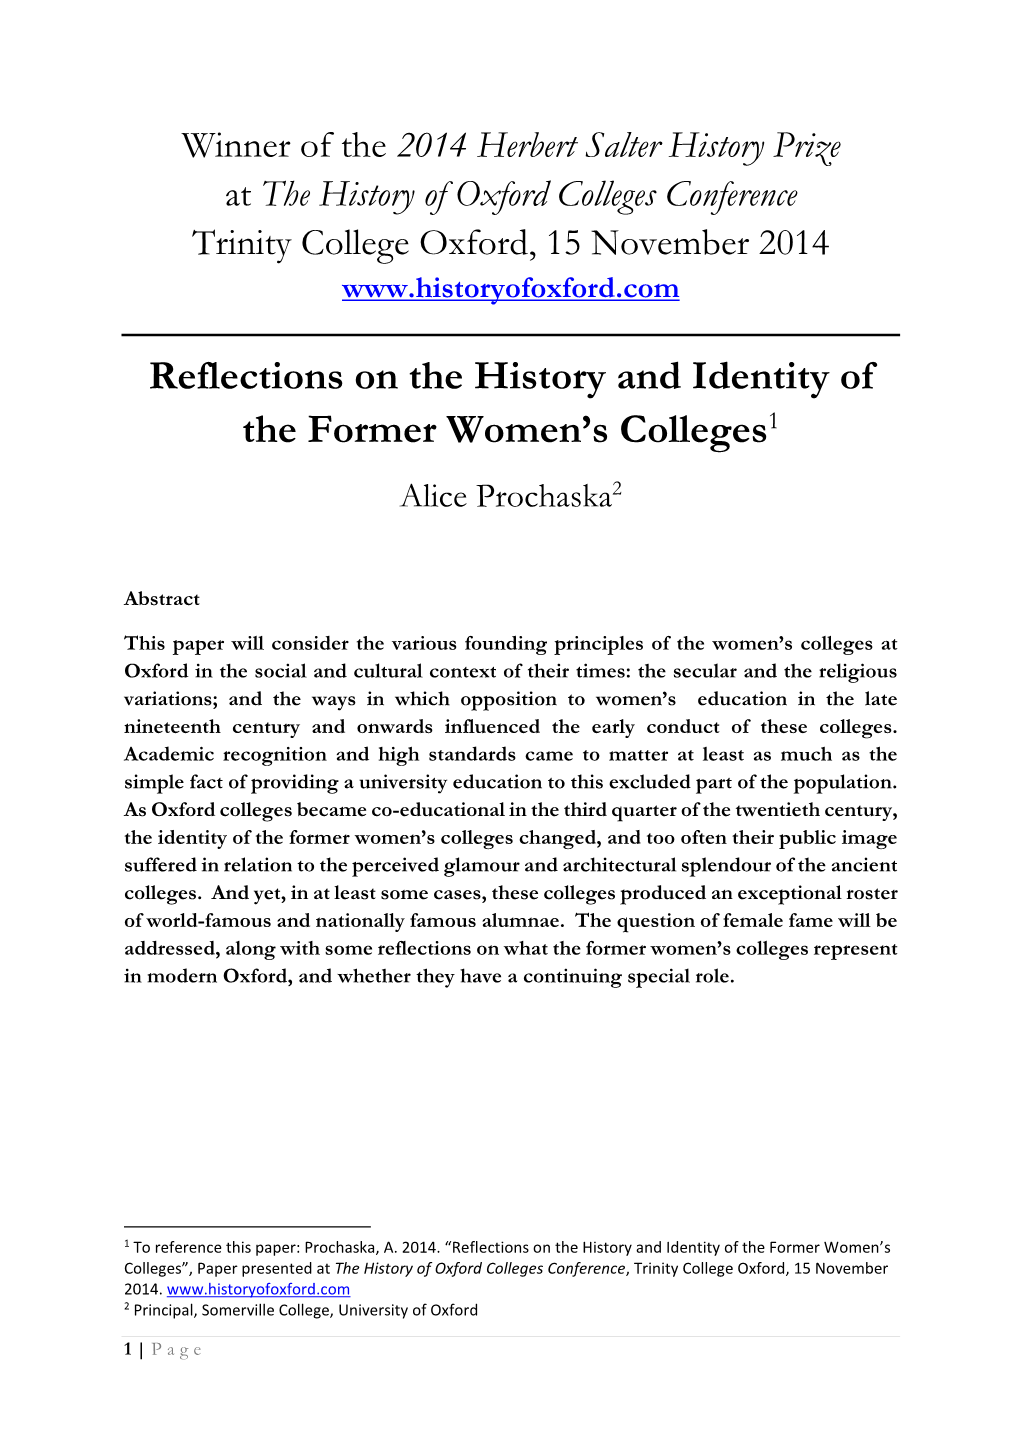 Reflections on the History and Identity of the Former Women's Colleges1